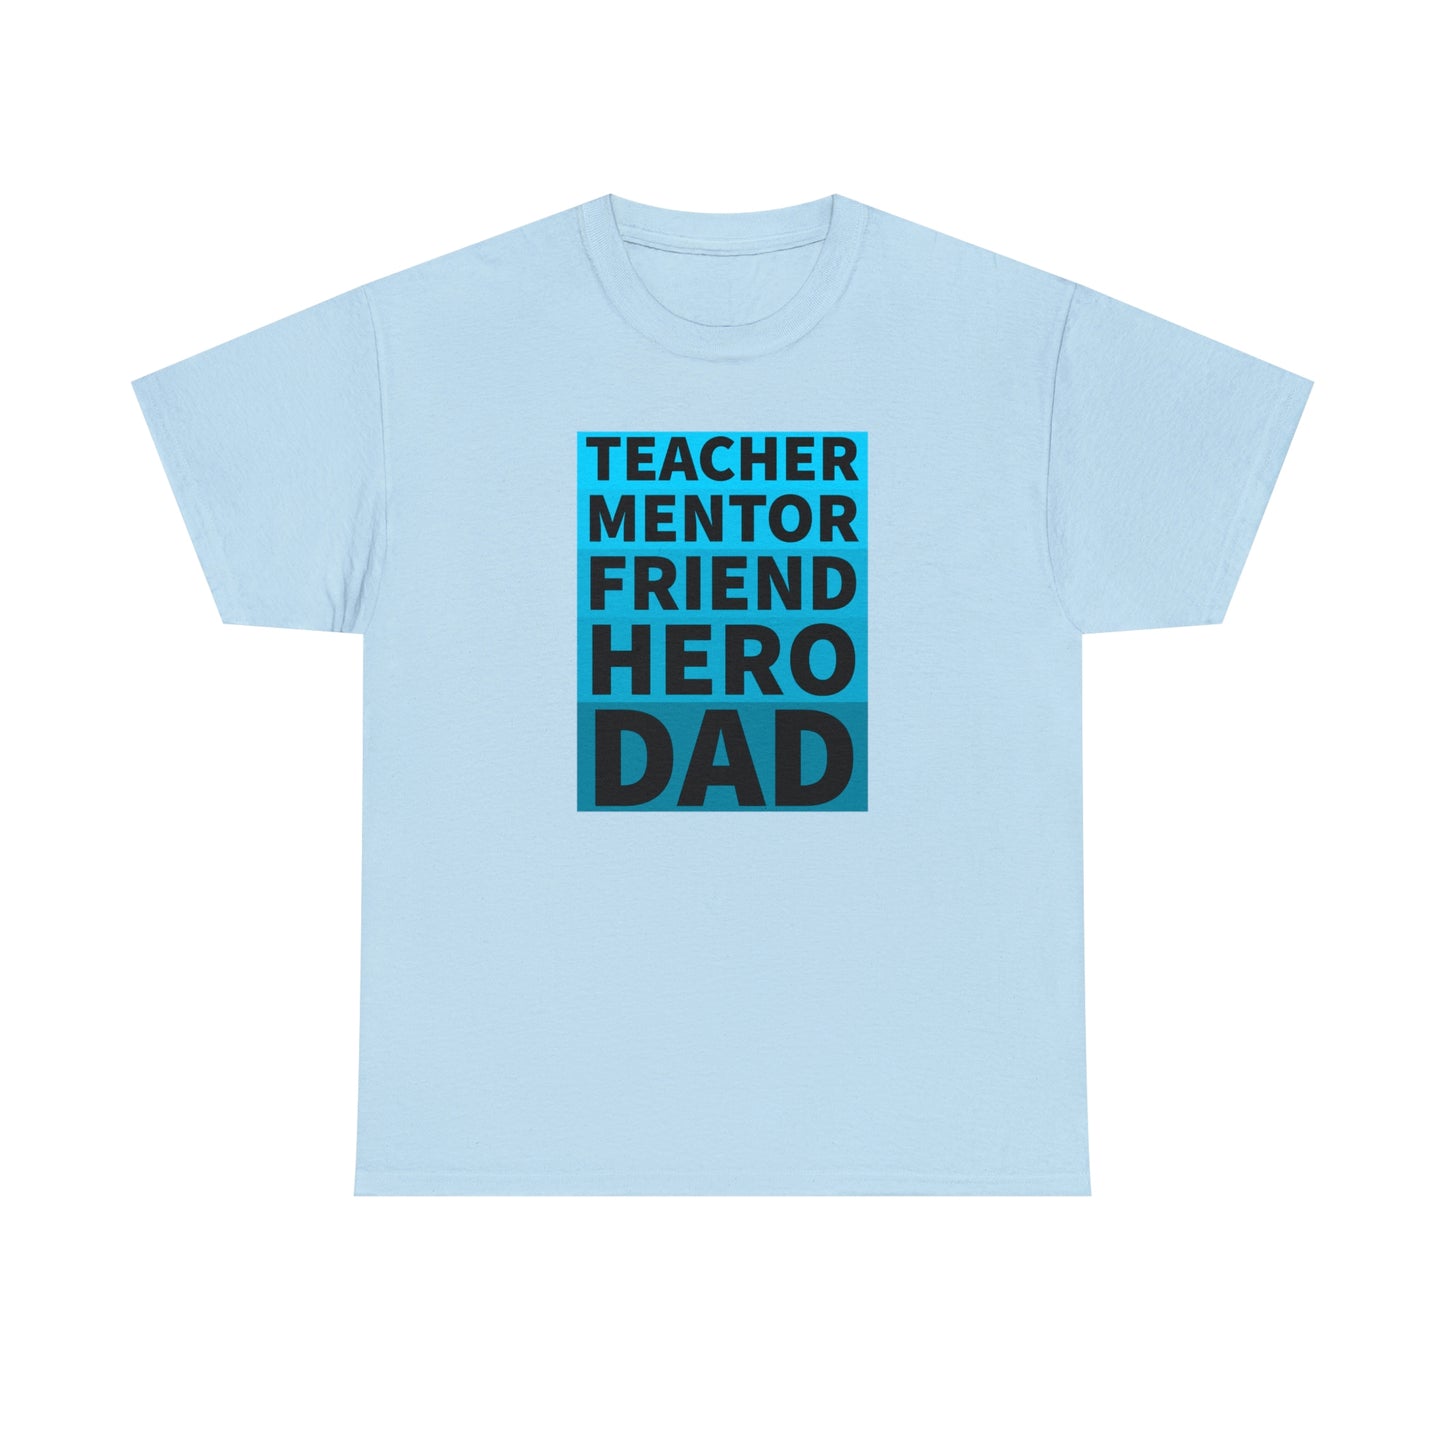 Dad T-Shirt For Father's Day TShirt For Mentor T Shirt For Hero Shirt For Friend T-Shirt For Teacher Shirt For Birthday TShirt for Best Dad Shirt